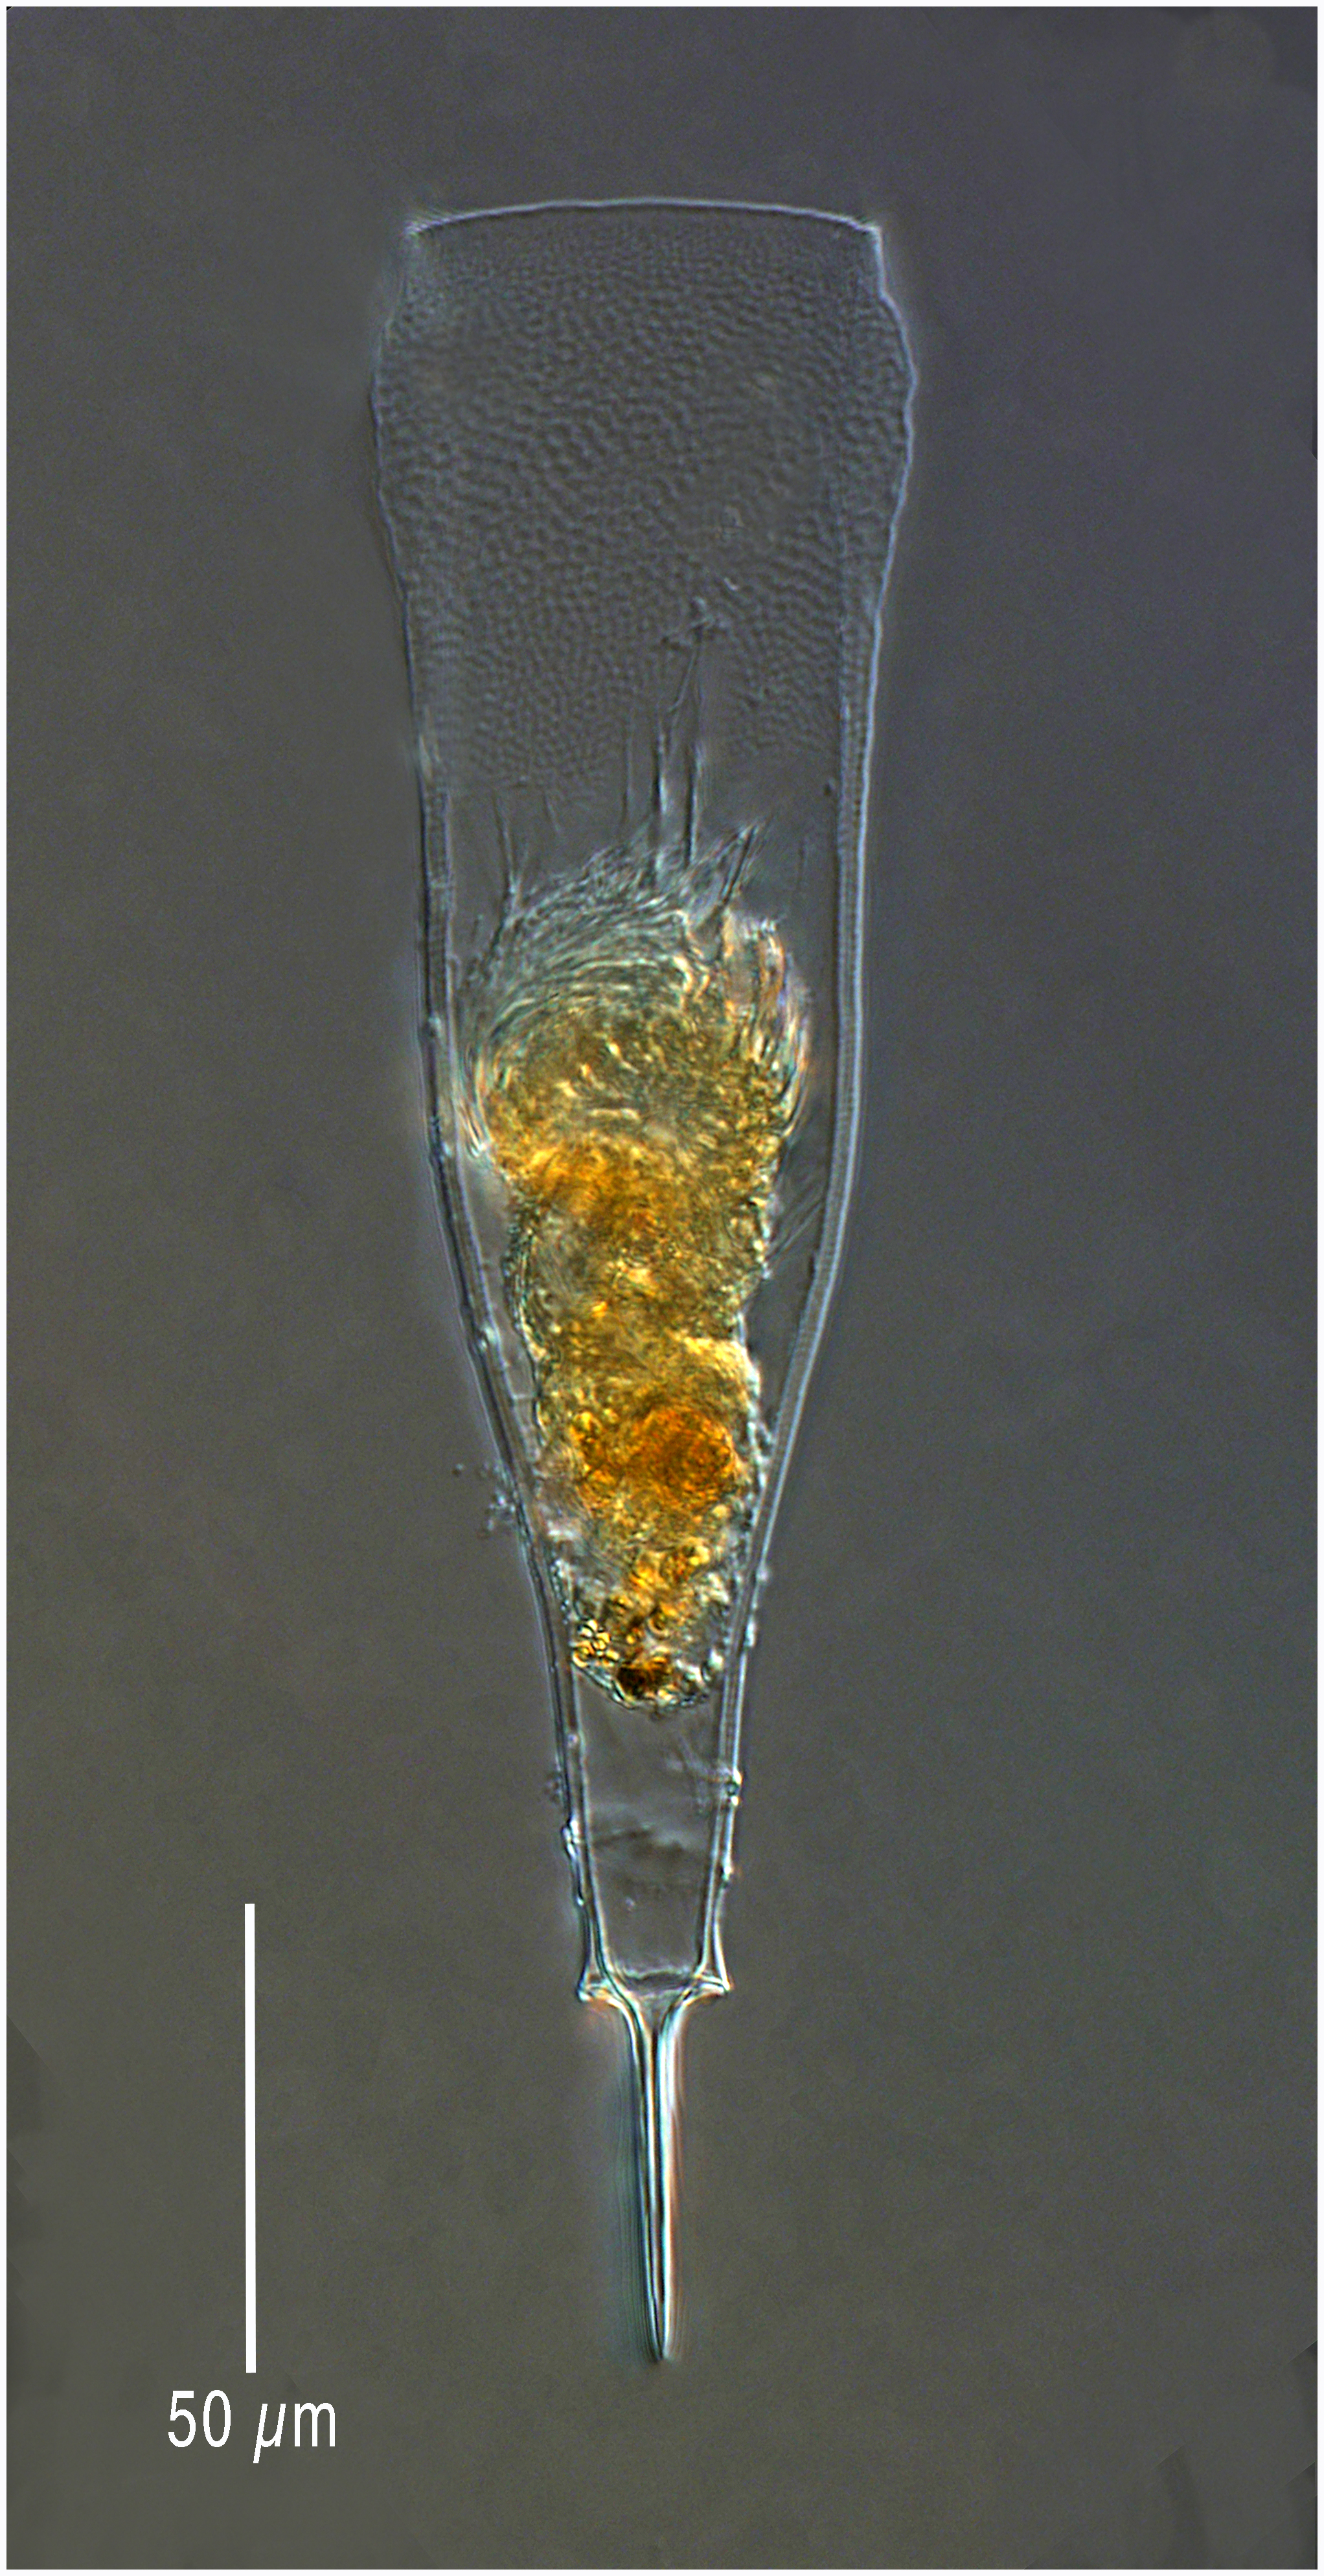 From 2 Km depth - Xystonellopsis spicata